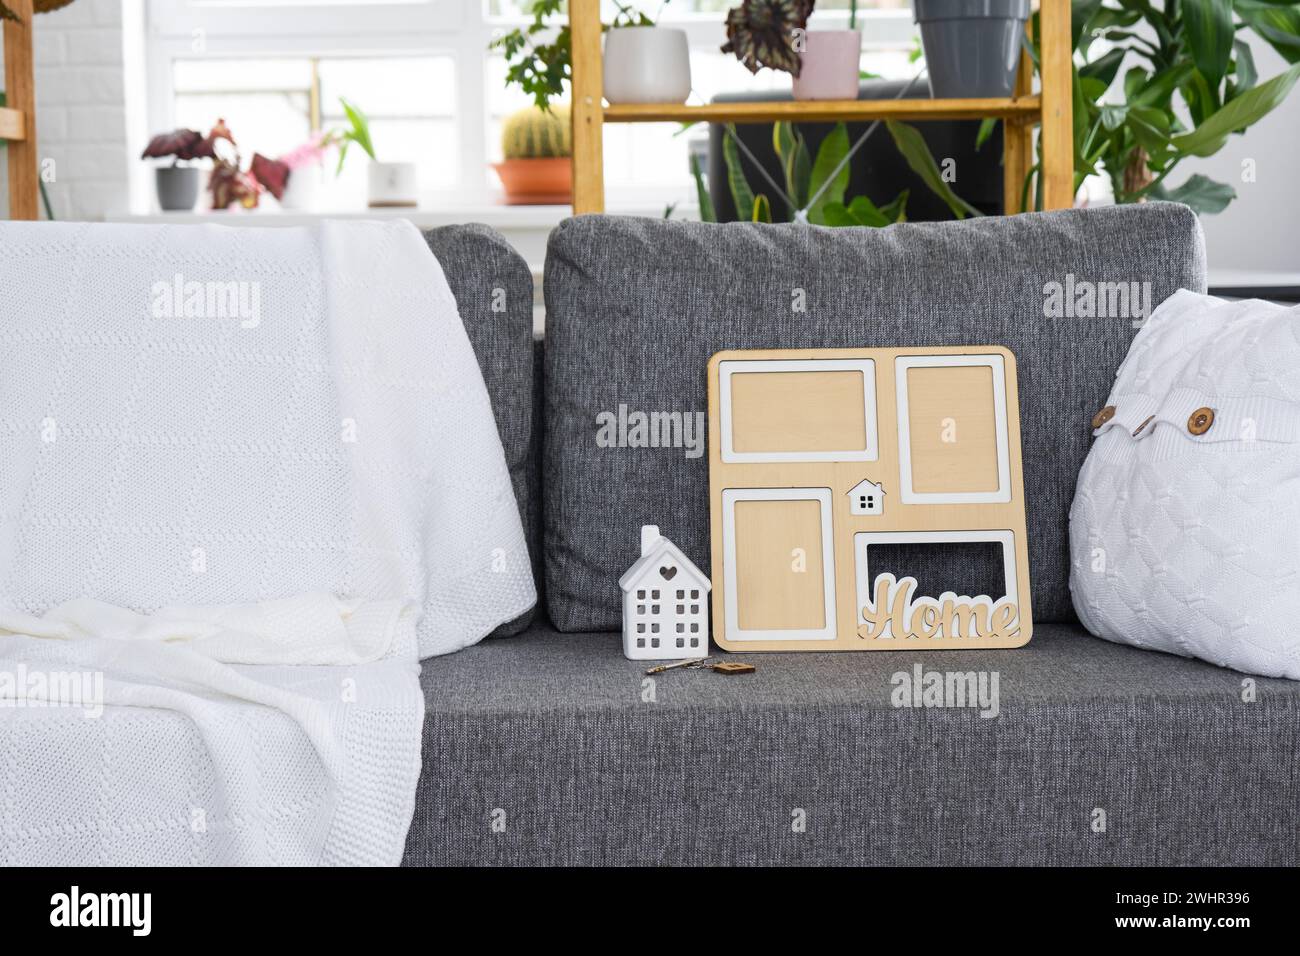 Key to home with keychain and mock up frame miniature of house on gray sofa in white interior with potted plants. Design, projec Stock Photo